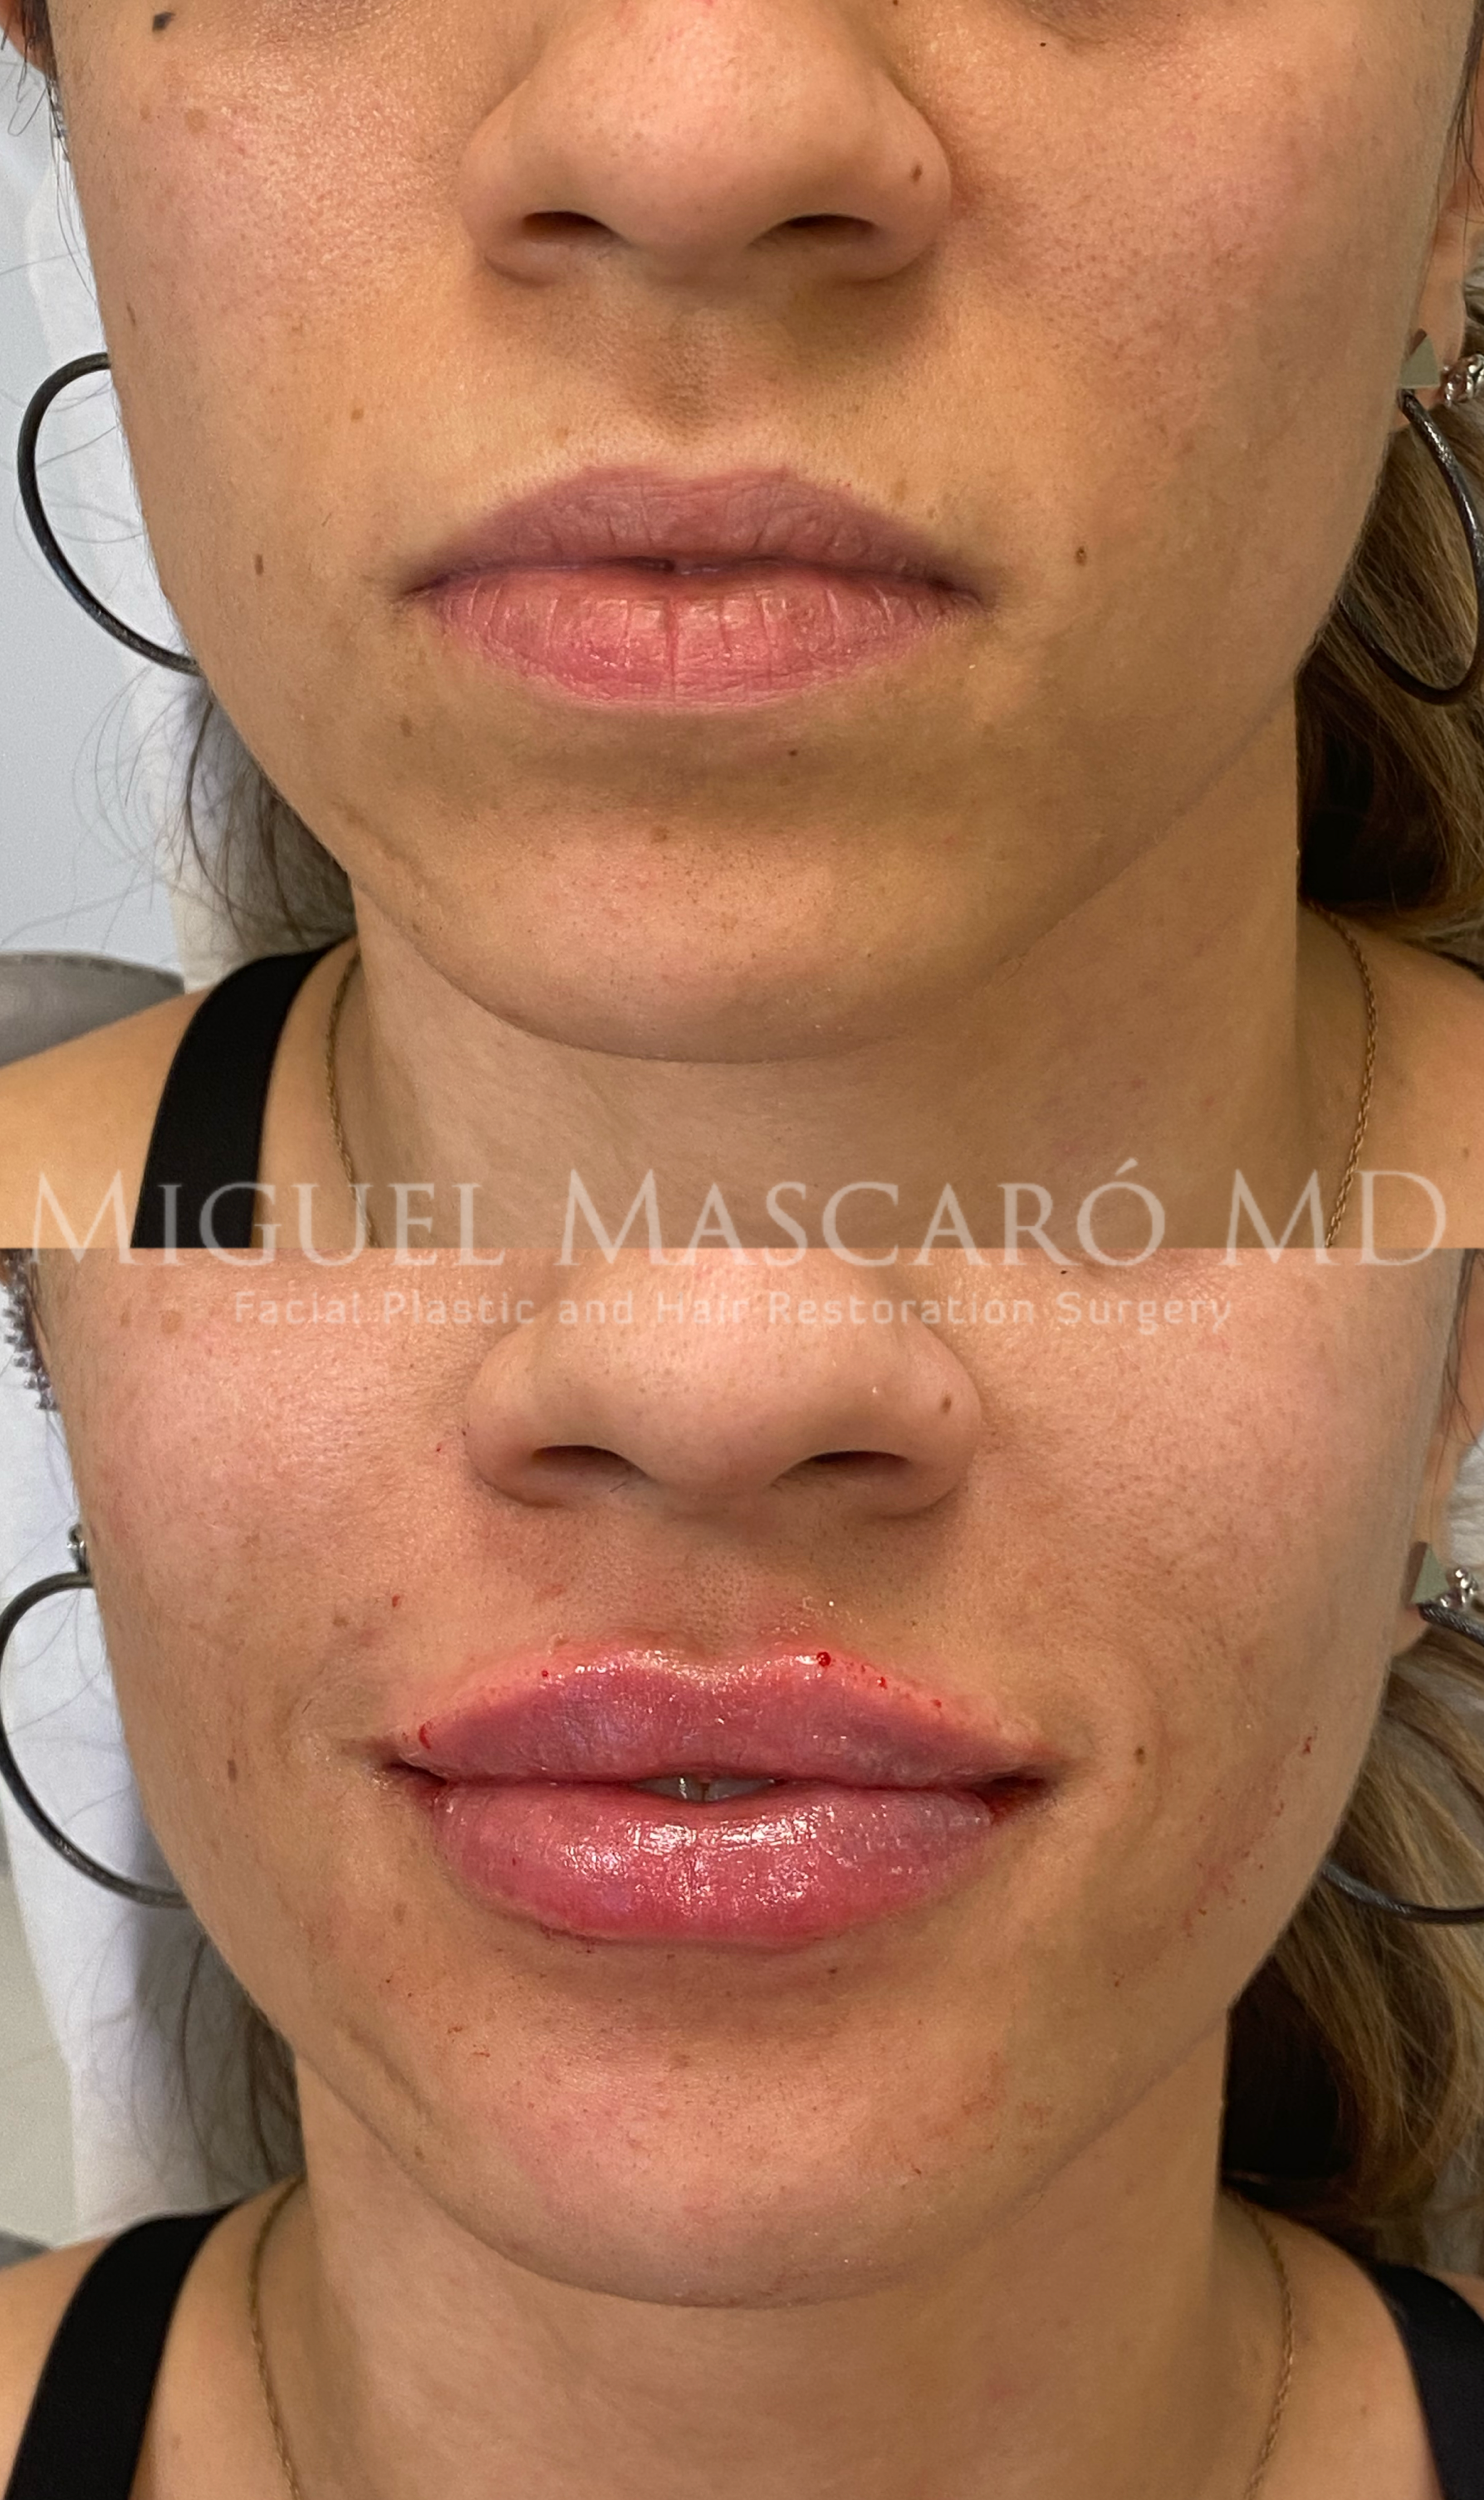  Lip filler for natural definition and pout  